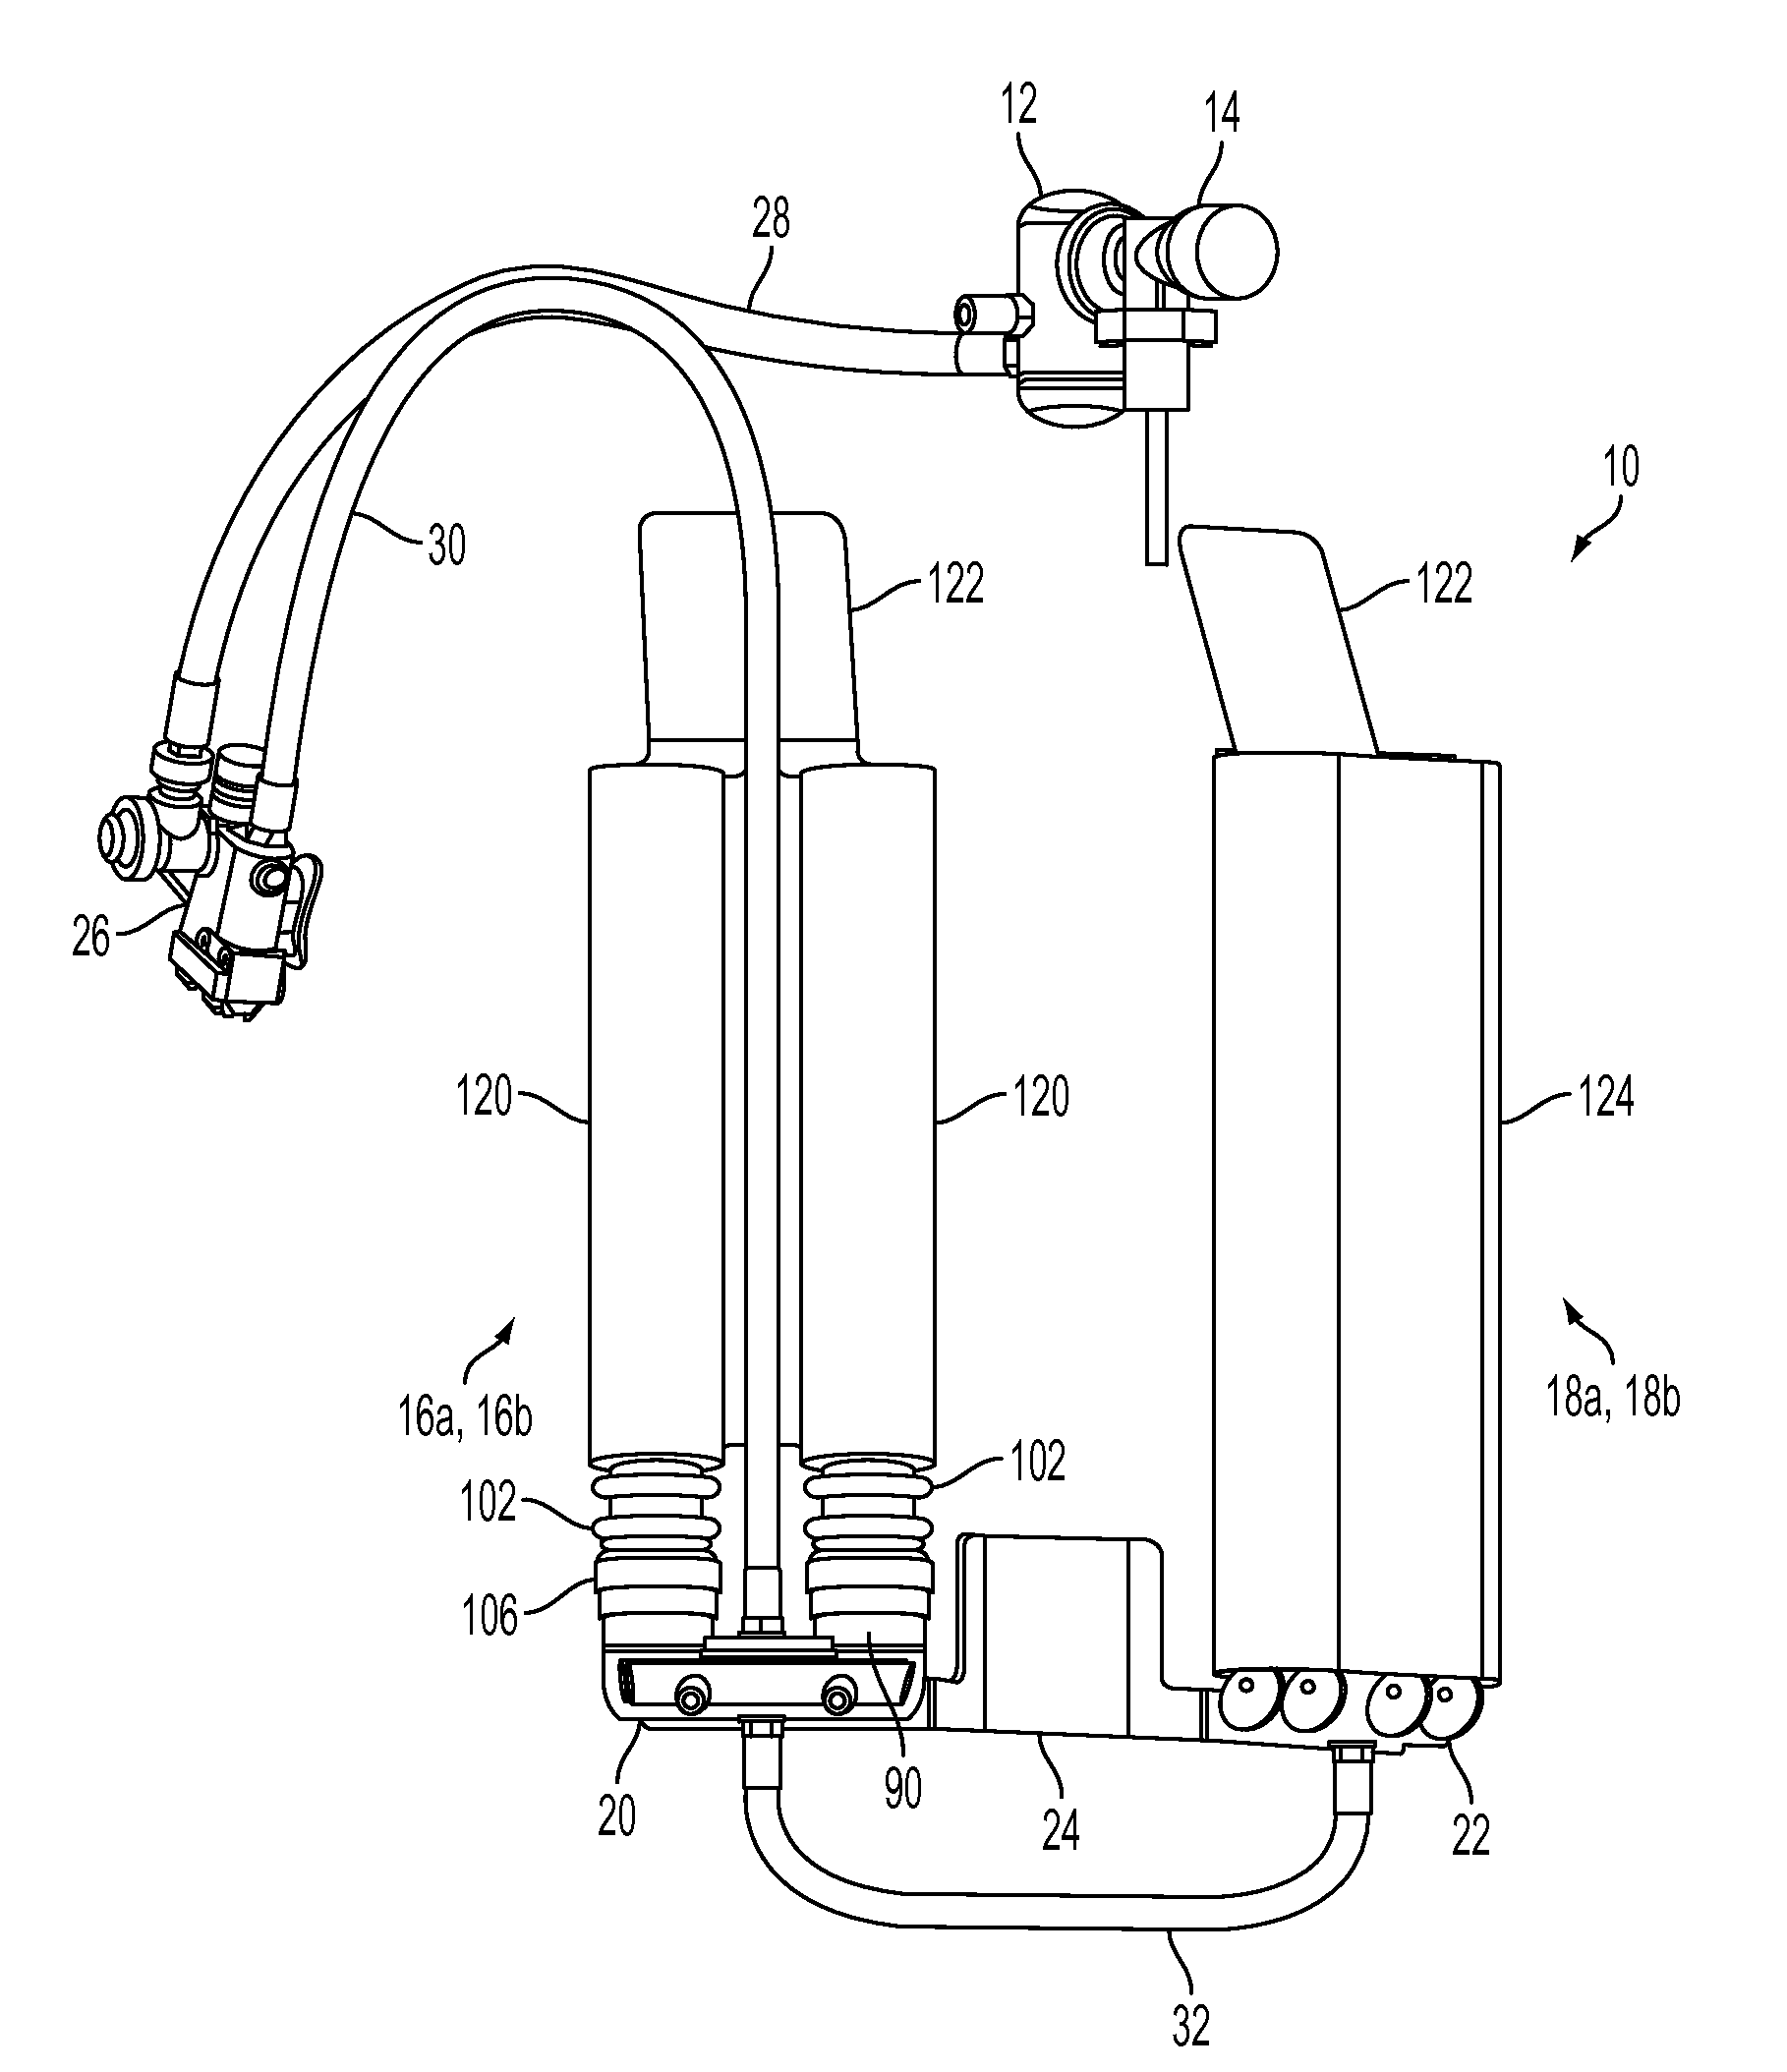 Method of and apparatus for bouyancy compensation for divers